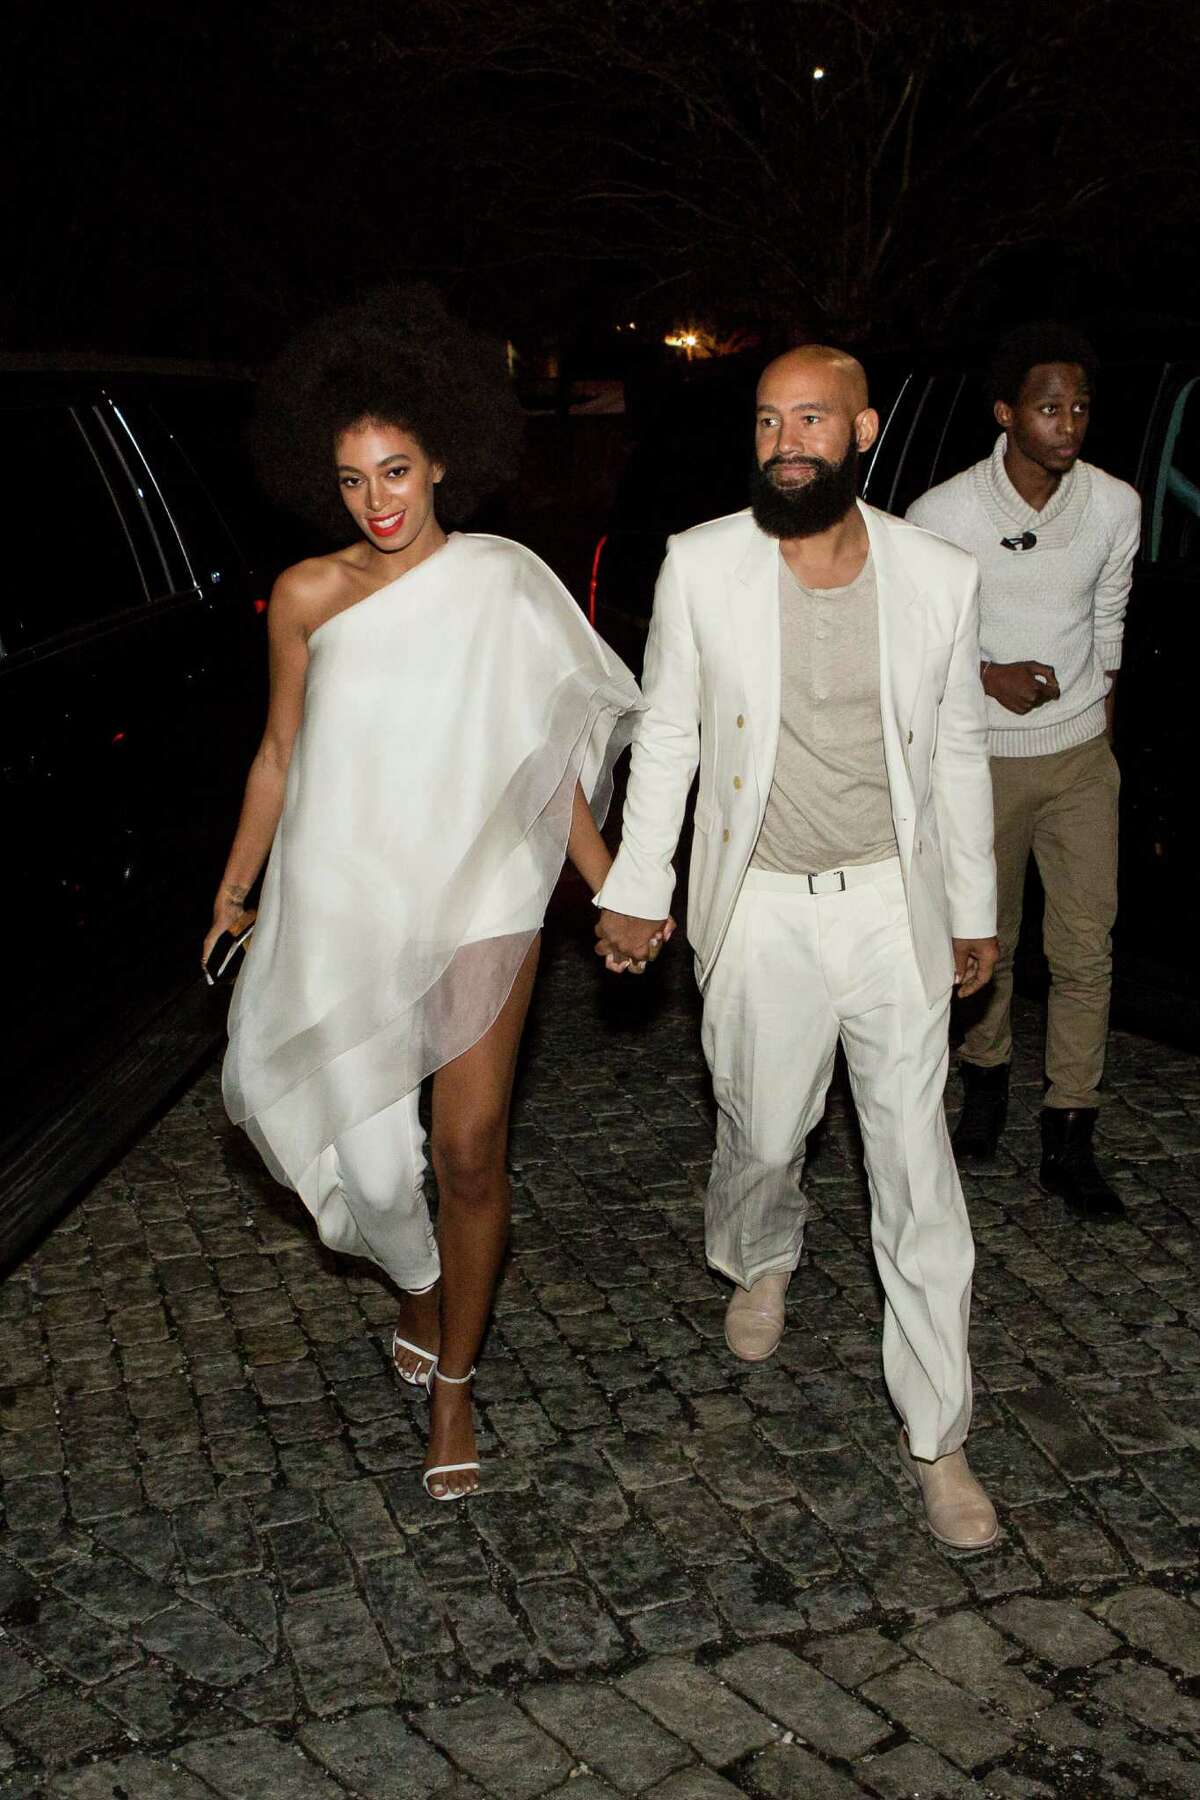 Musician Solange Knowles (wearing Stephane Rolland with Stuart Weitzman shoes and a Lee Savage clutch) and her fiancee, music video director Alan Ferguson (wearing Costume National with an H&M shirt and Maison Martin Margiela shoes), arrive for their rehearsal dinner at the Felicity Street Methodist Church on November 15, 2014 in New Orleans, Louisiana. (Photo by Josh Brasted/WireImage)AP story: Solange Knowles weds video director